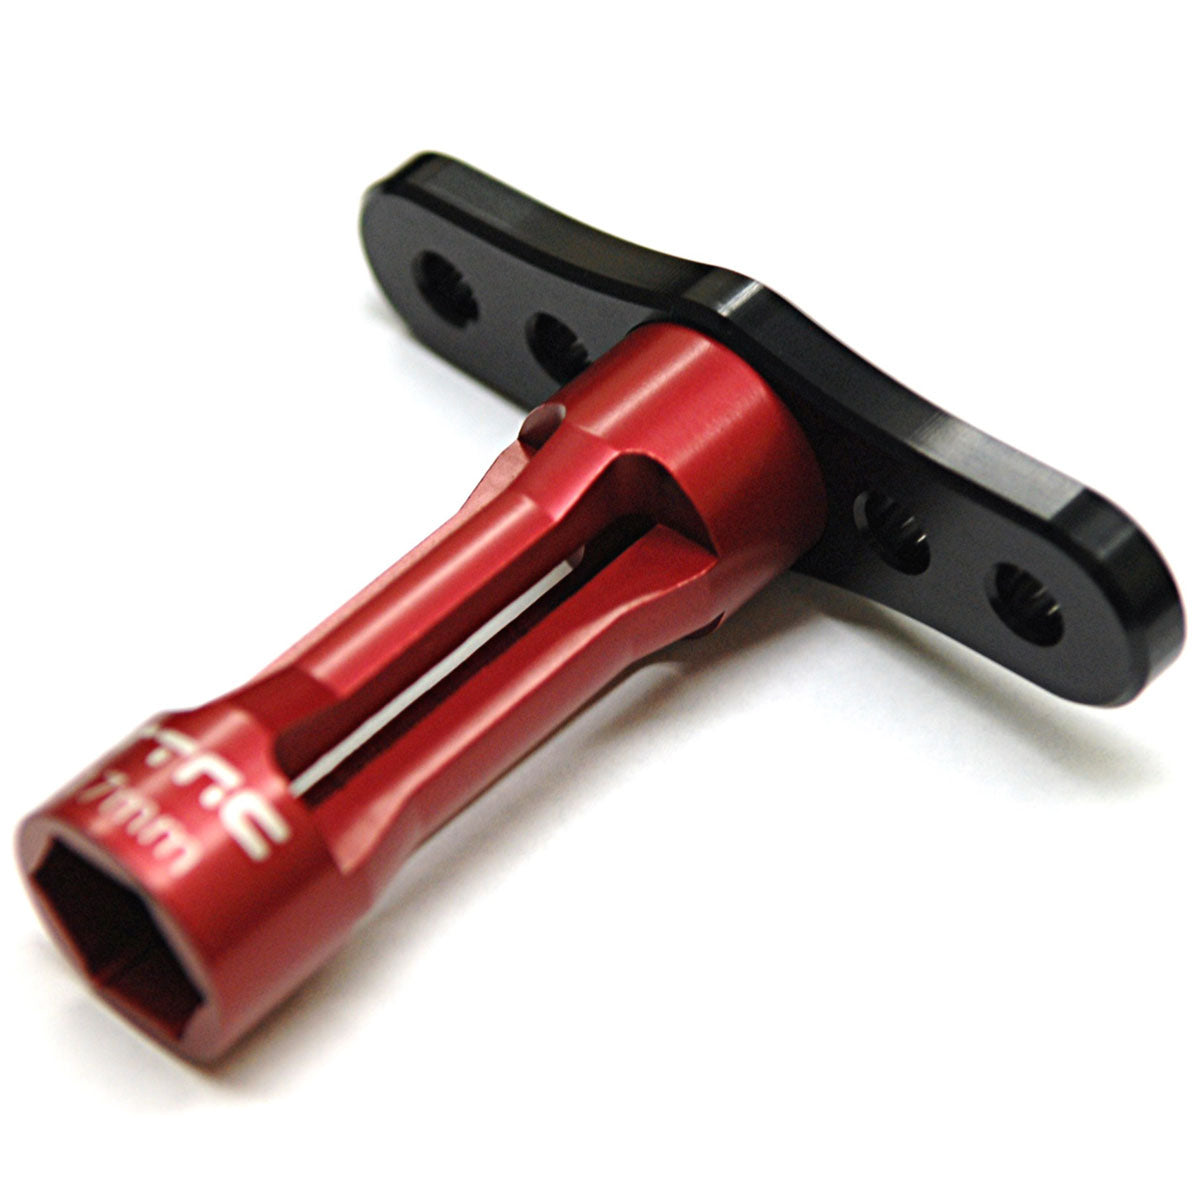 CNC Machined Aluminum Long Shank 17mm Hex Nut Wrench (Black/Red)